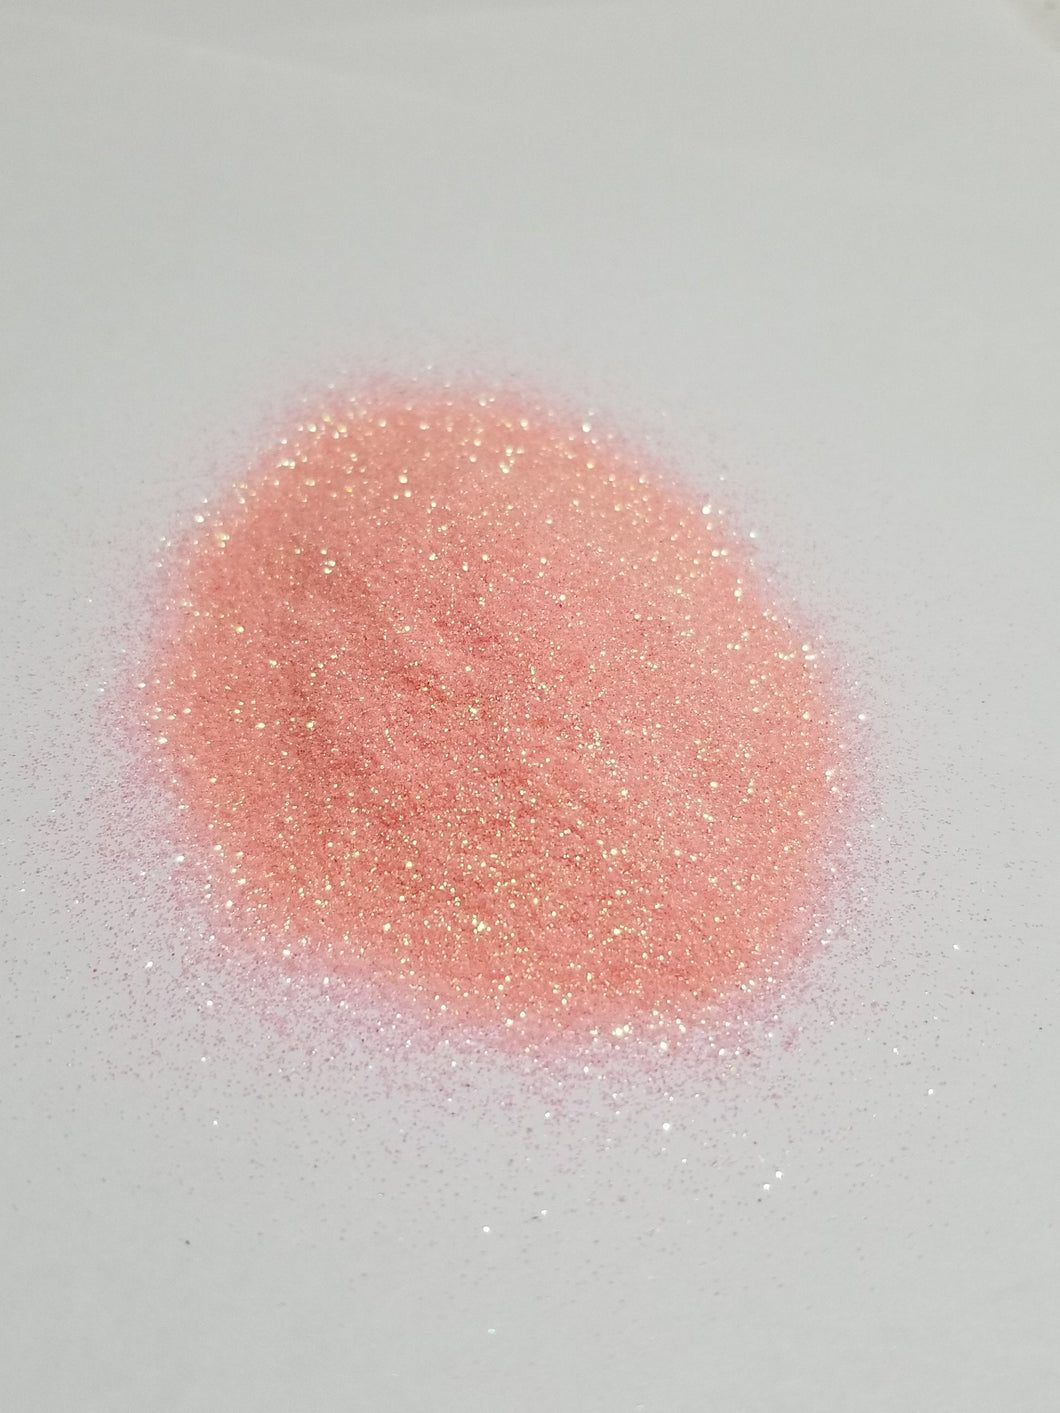 Peach Custom Glitter Mix - Available in 1,2, or 4 oz - Polyester, Solvent Resistant